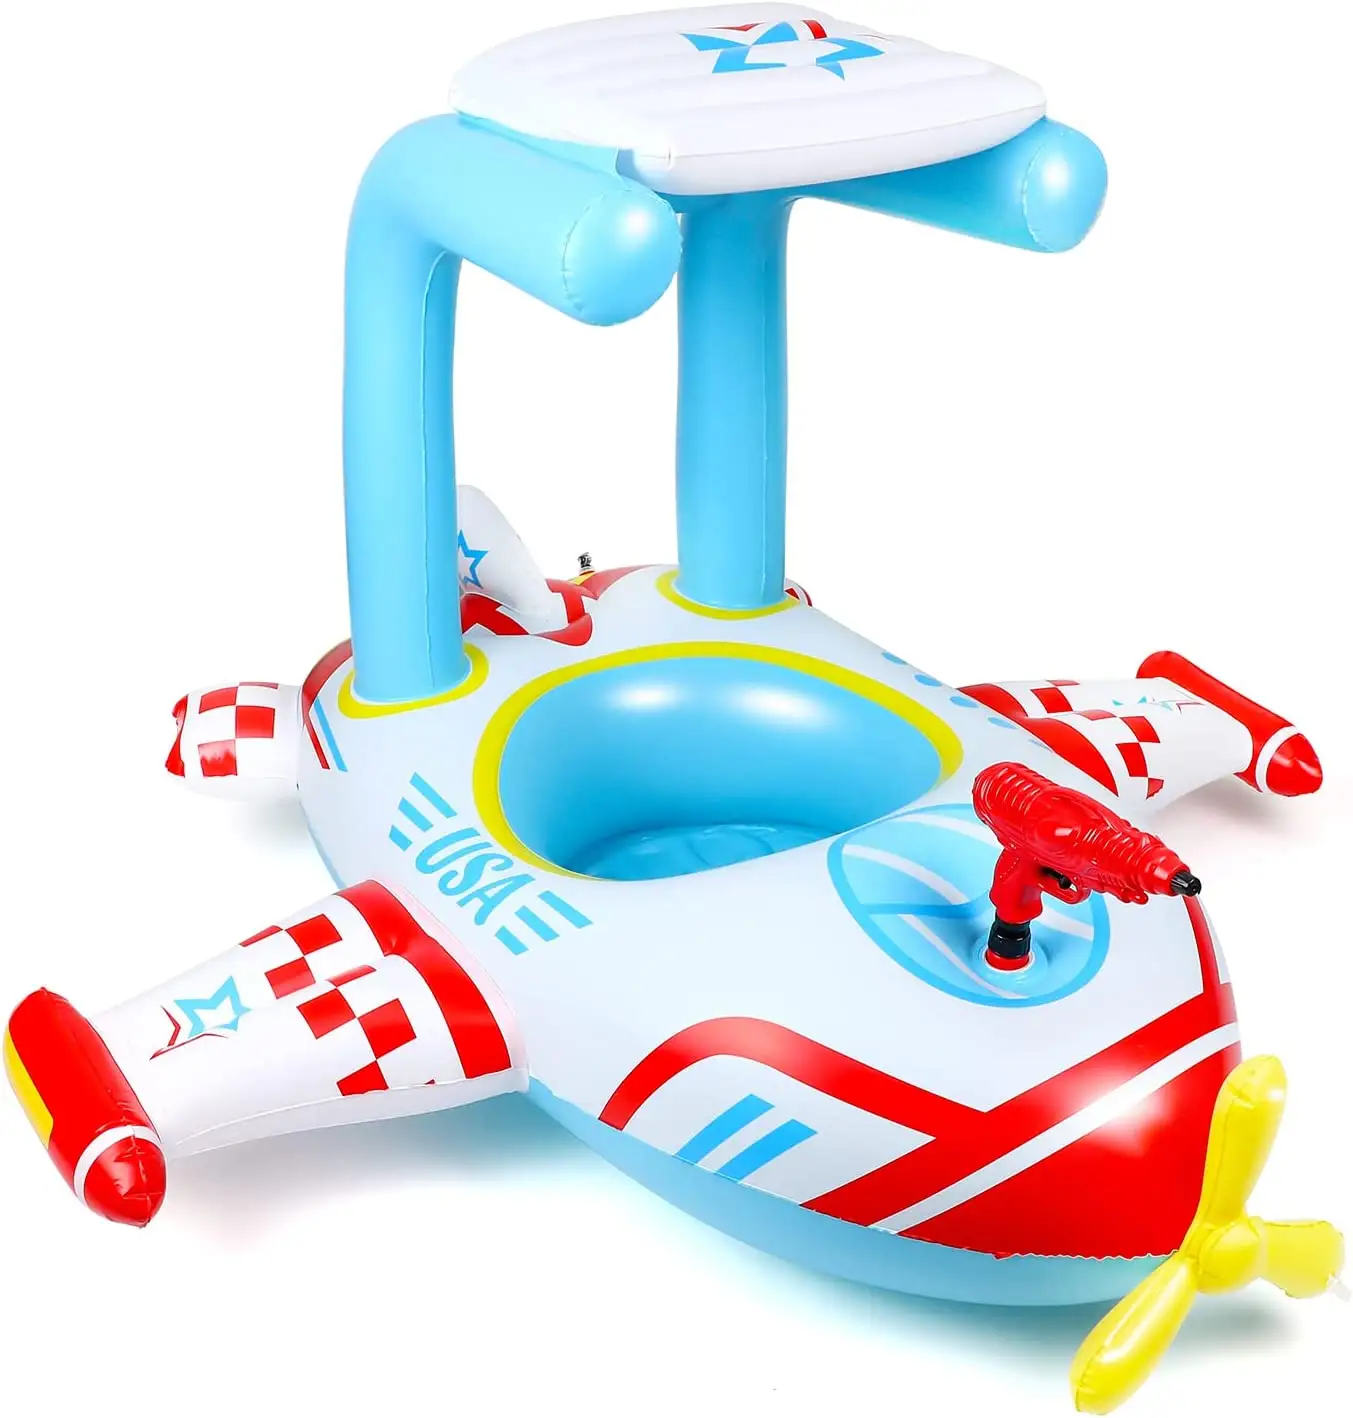 Large Pool Floats- Inflatable Airplane Floats with Sun Canopy Design and Built-in Squirt Gun - Pool Boats Ride-on